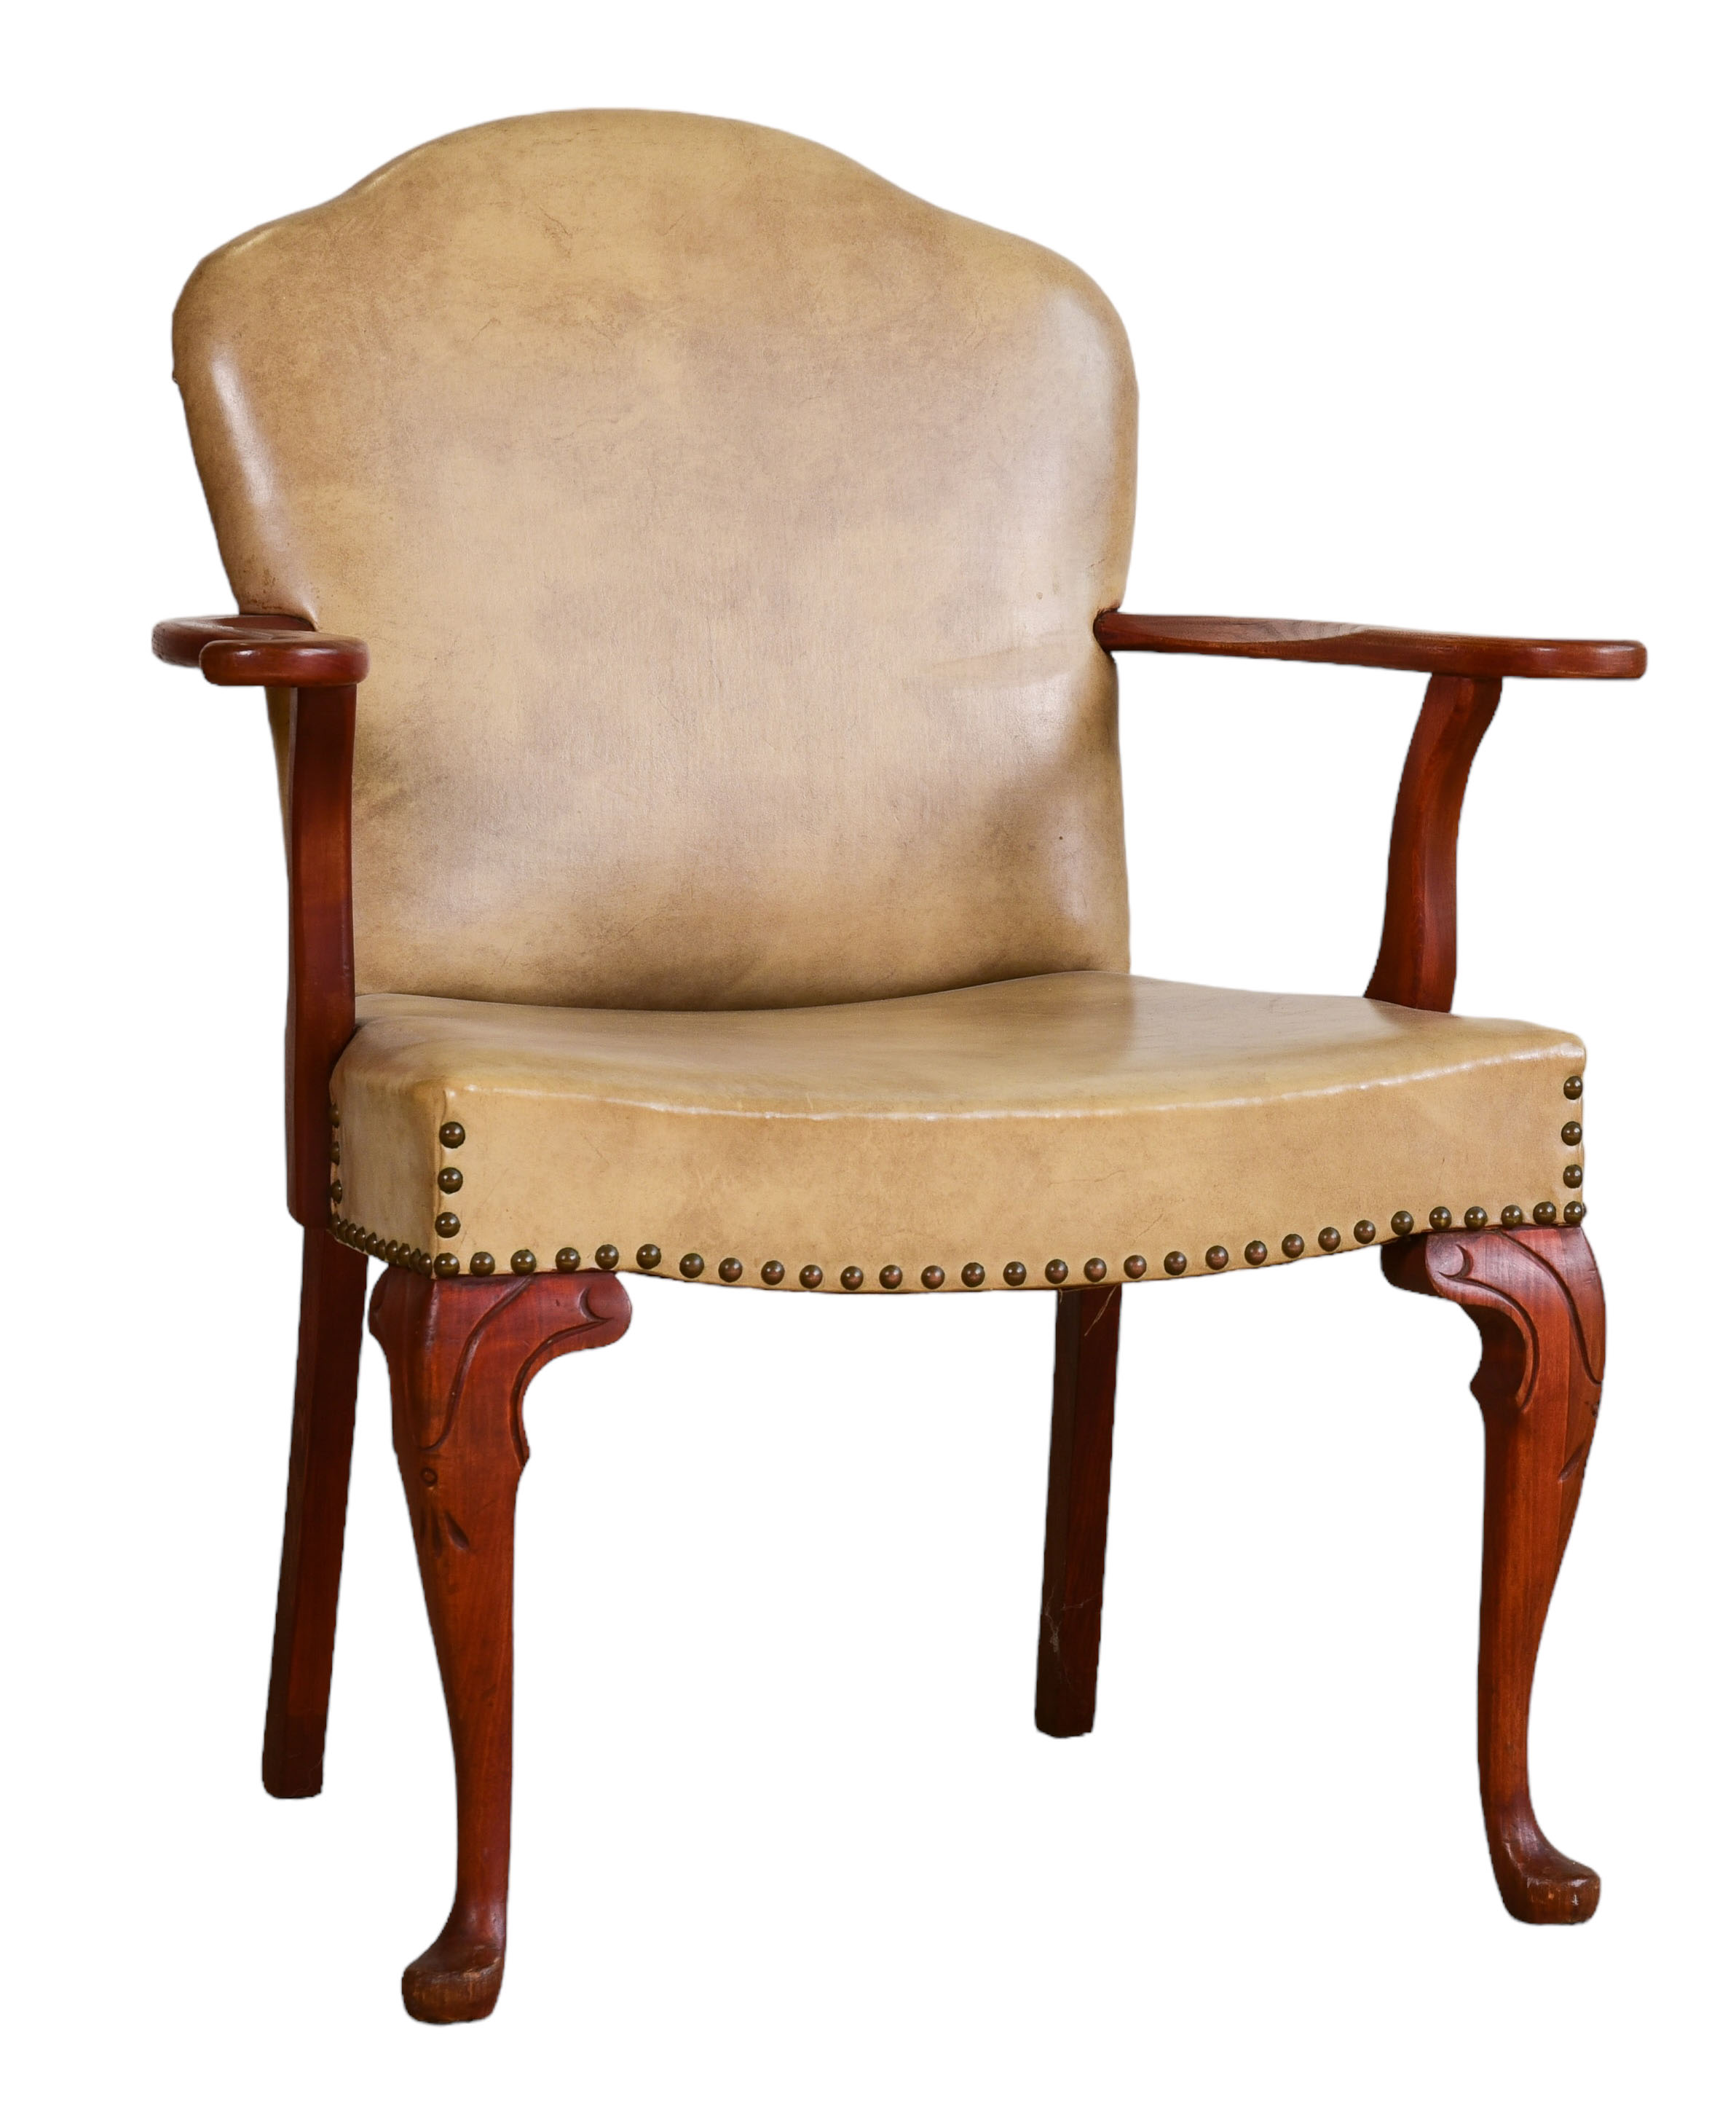 Queen Anne style oak and leather